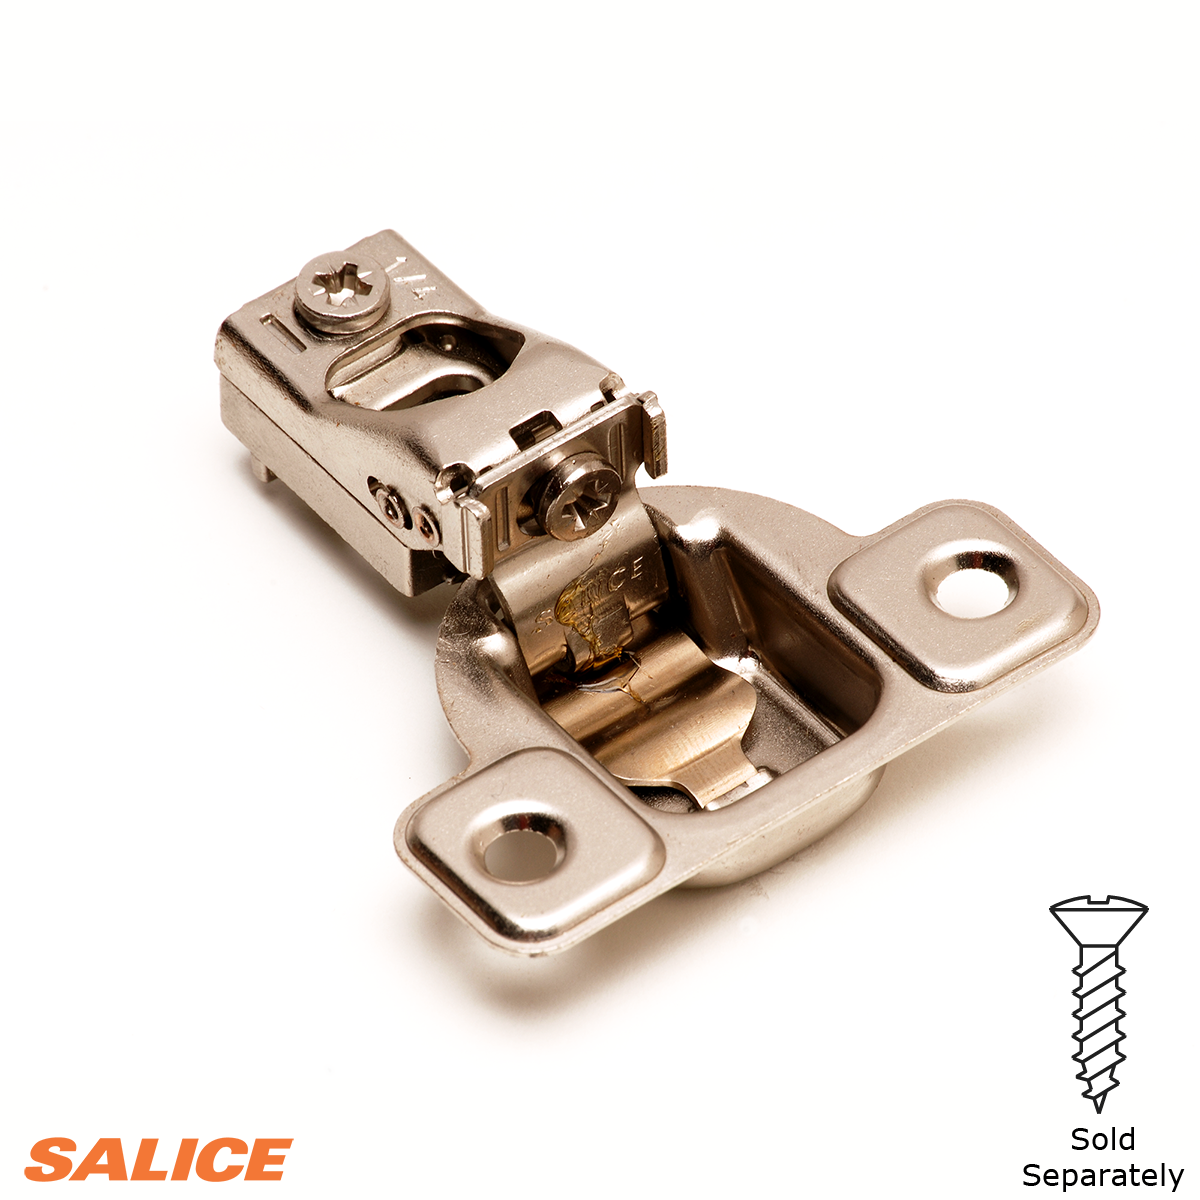 Salice Excentra 106 1 4 Overlay Compact Face Frame Hinge Walzcraft